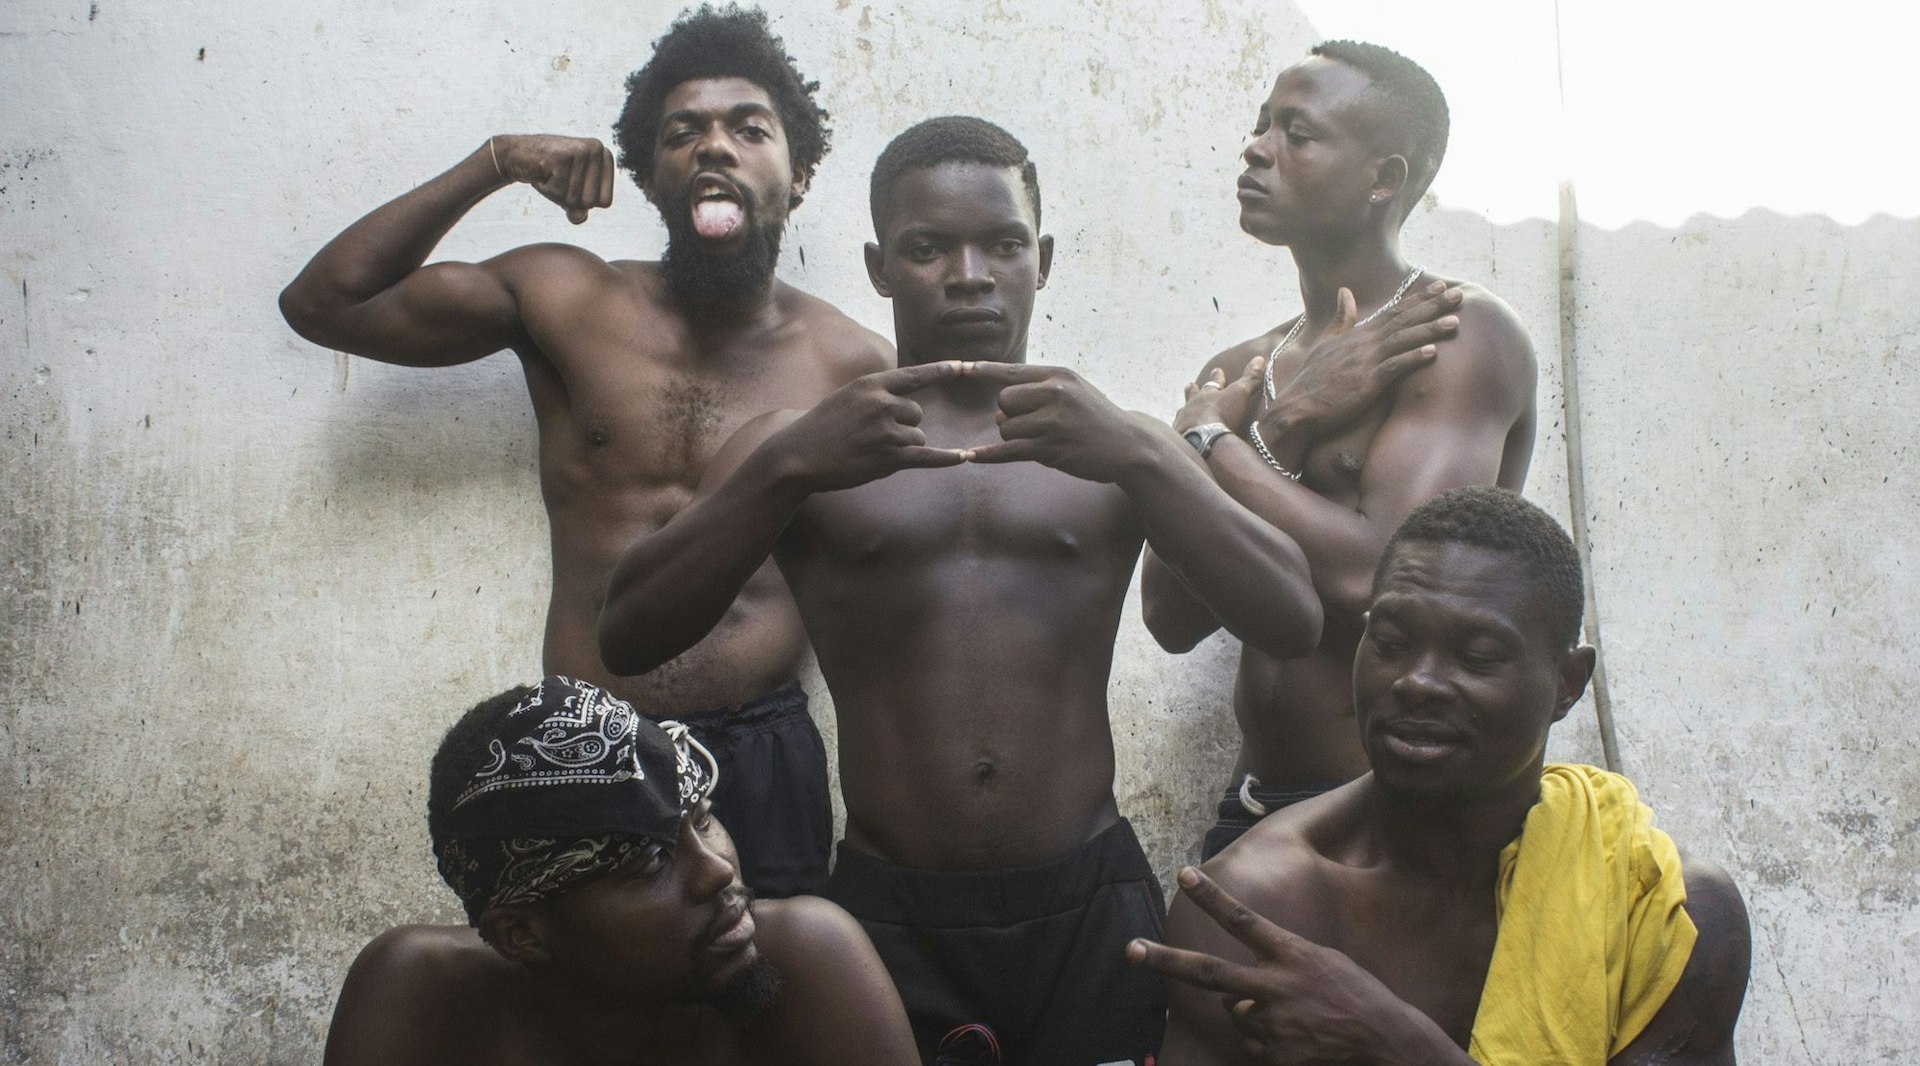 The Cameroonian inmates who made an album behind bars